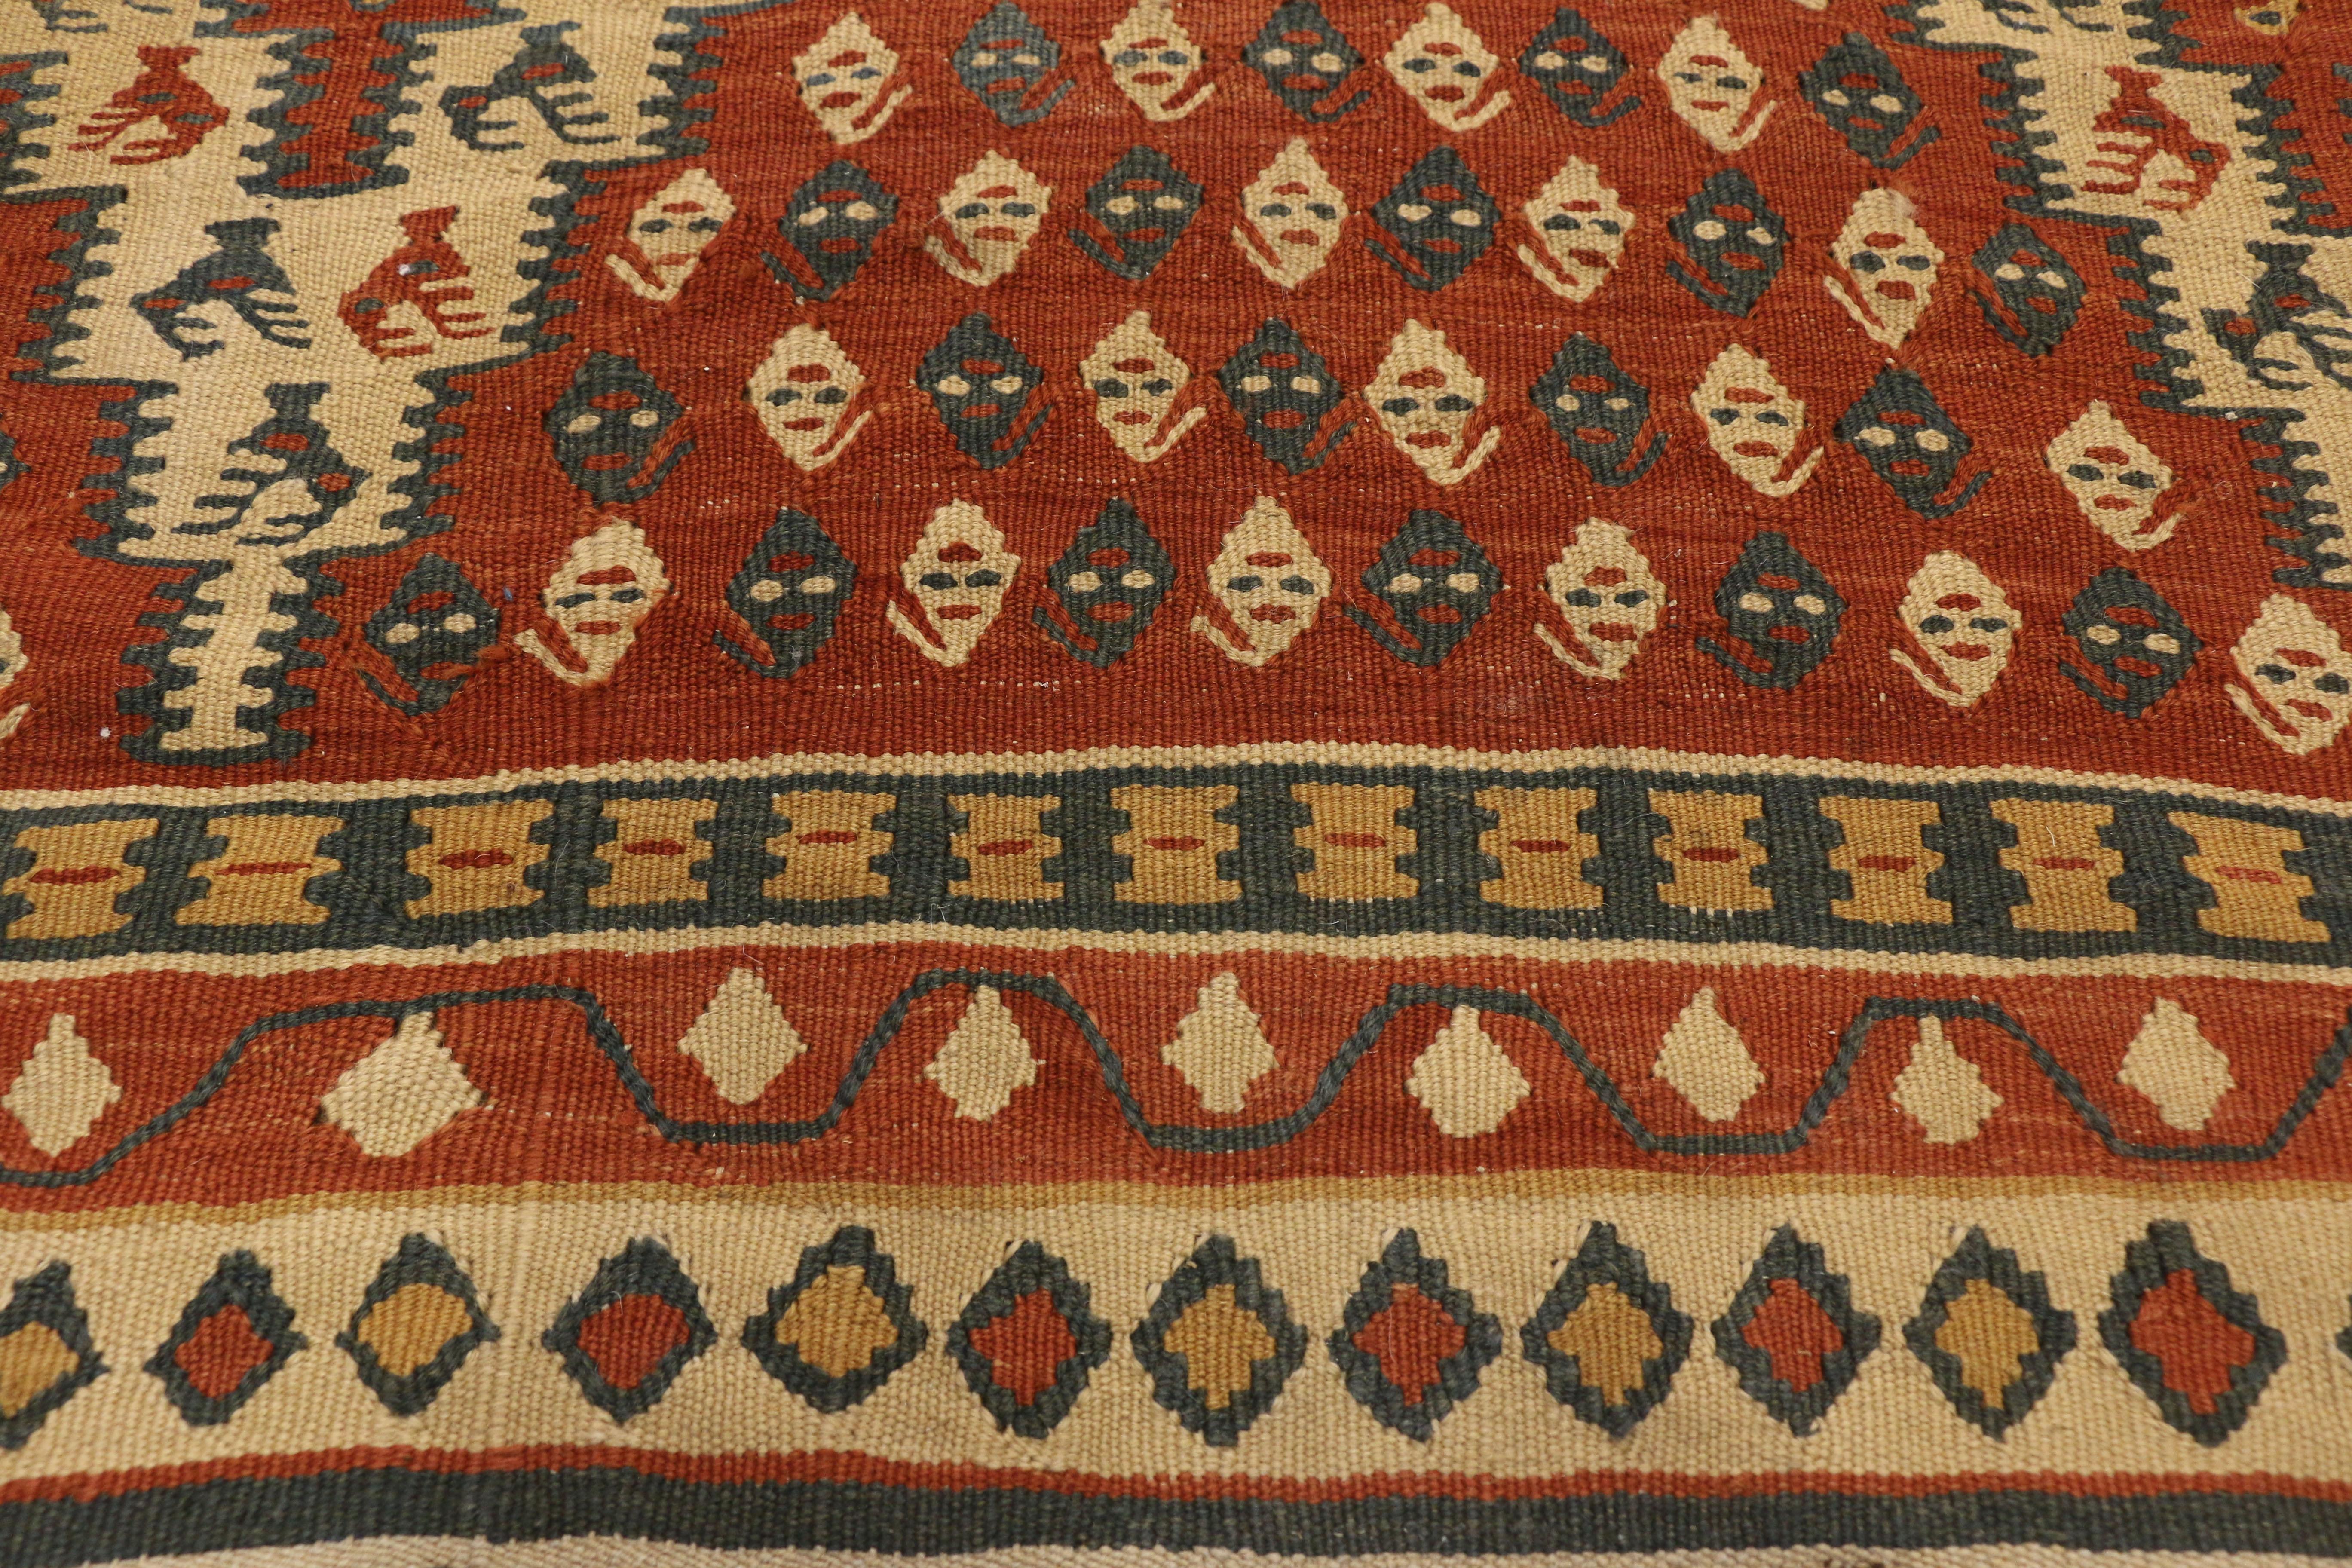 Vintage Persian Kilim Rug with Nomadic Tribal Style In Good Condition For Sale In Dallas, TX